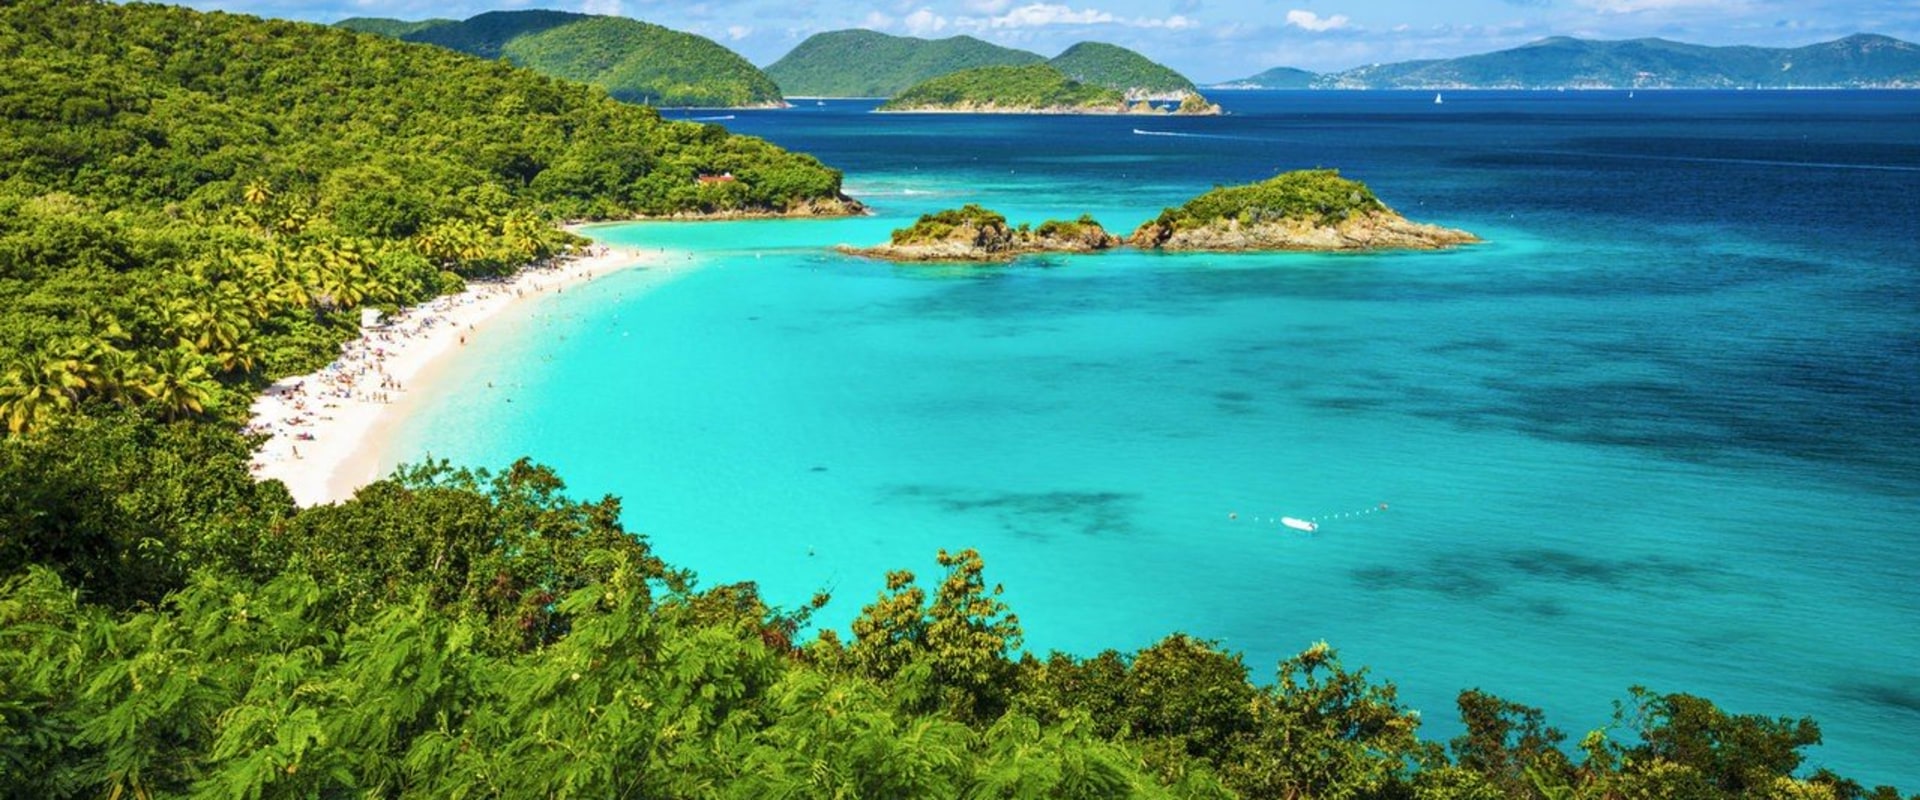 Island Hopping in the Virgin Islands: A Guide for Travelers